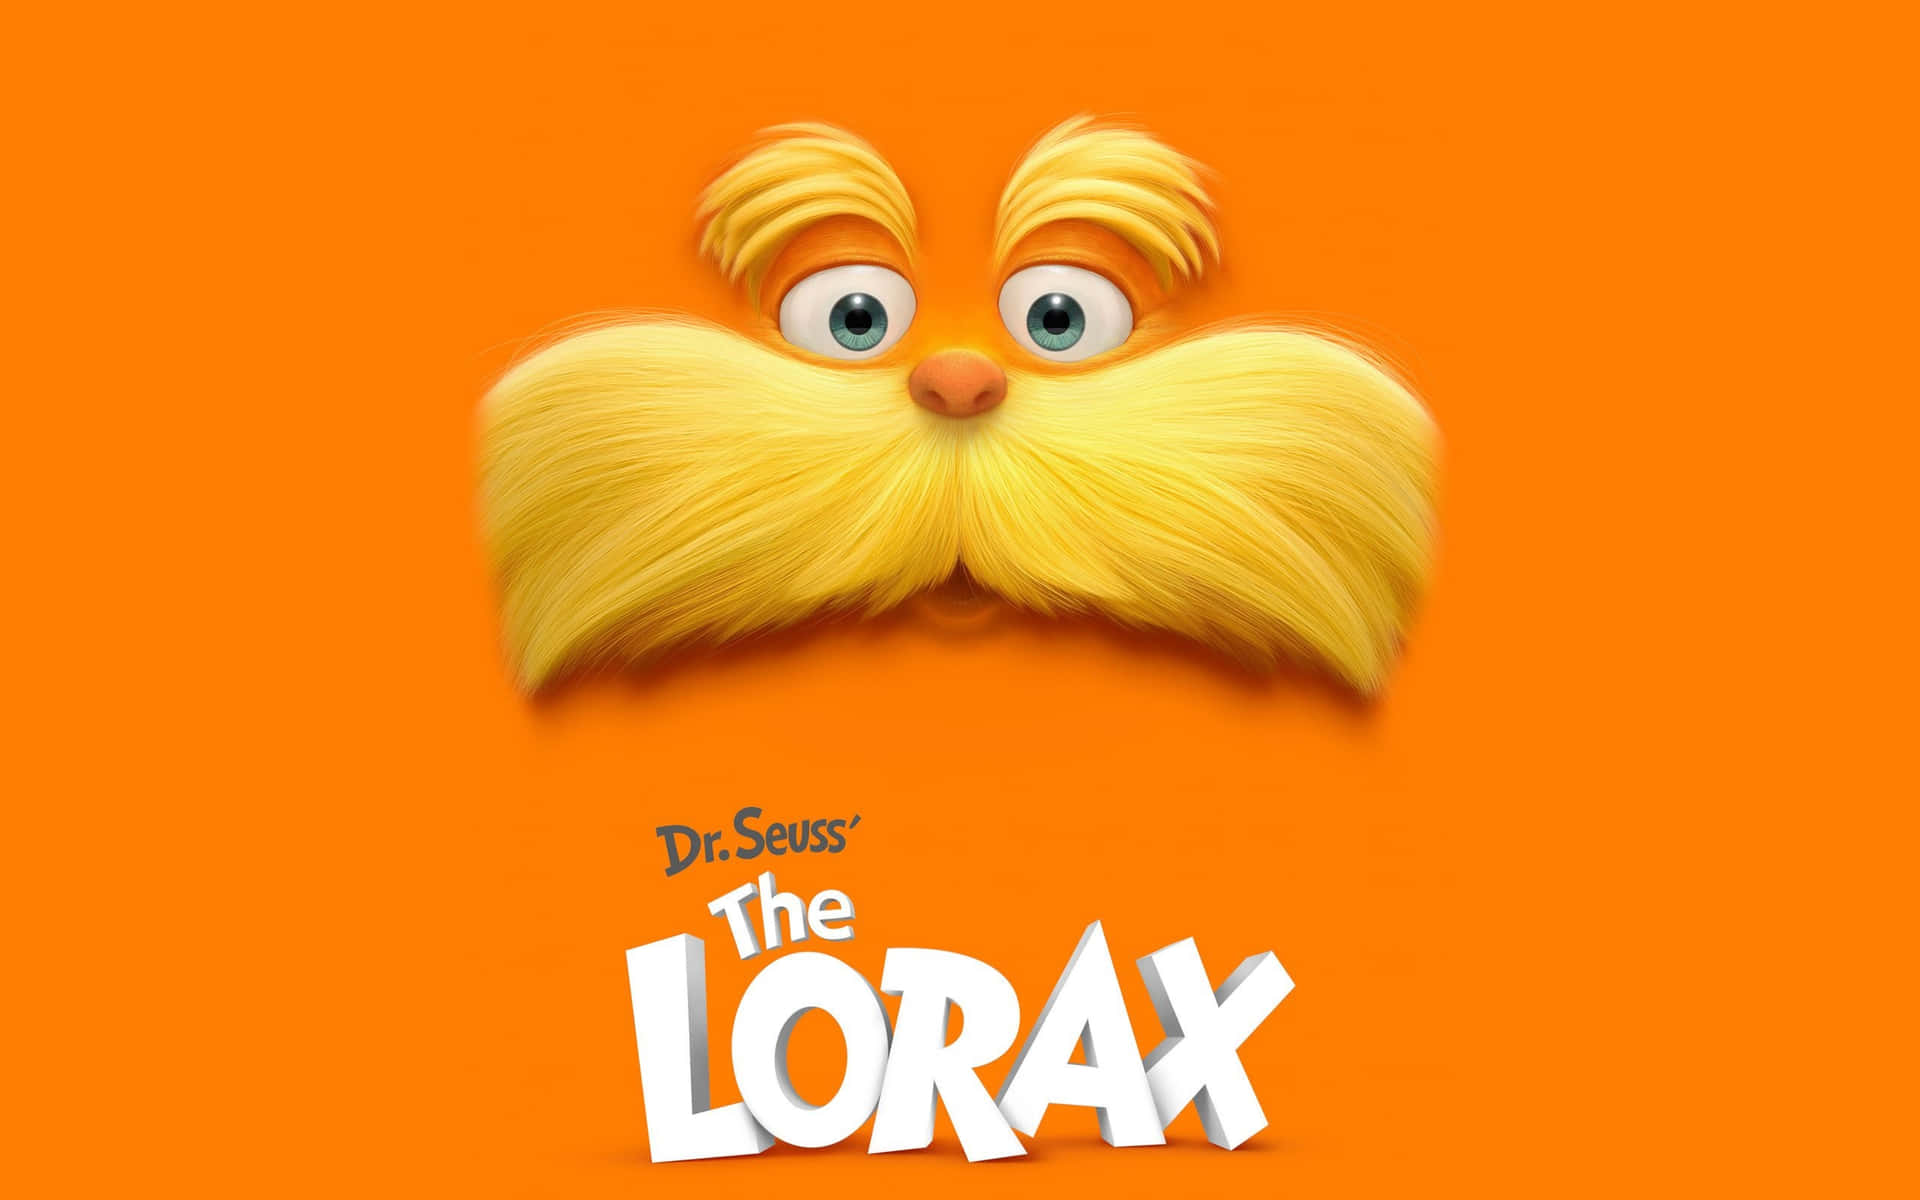 The Lorax Character Orange Background Wallpaper